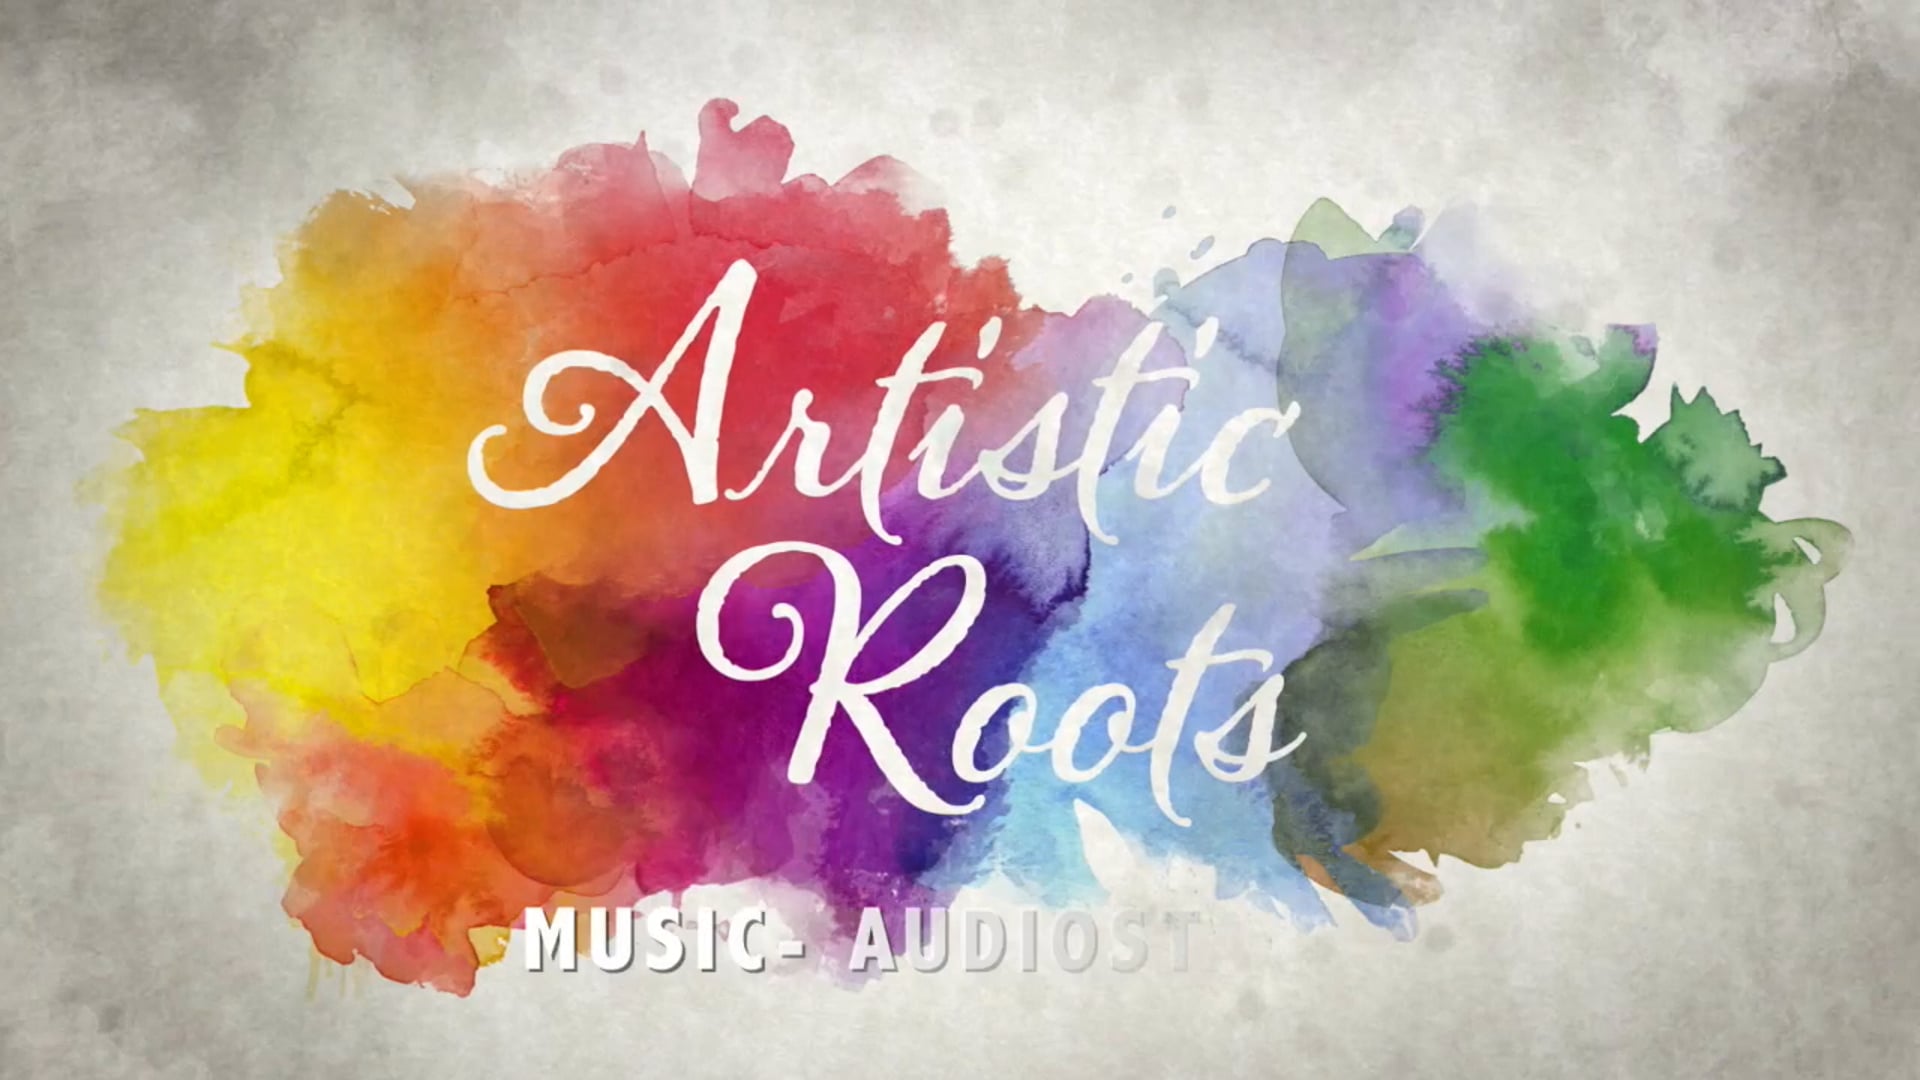 PBS Artistic Roots Audiostate 55